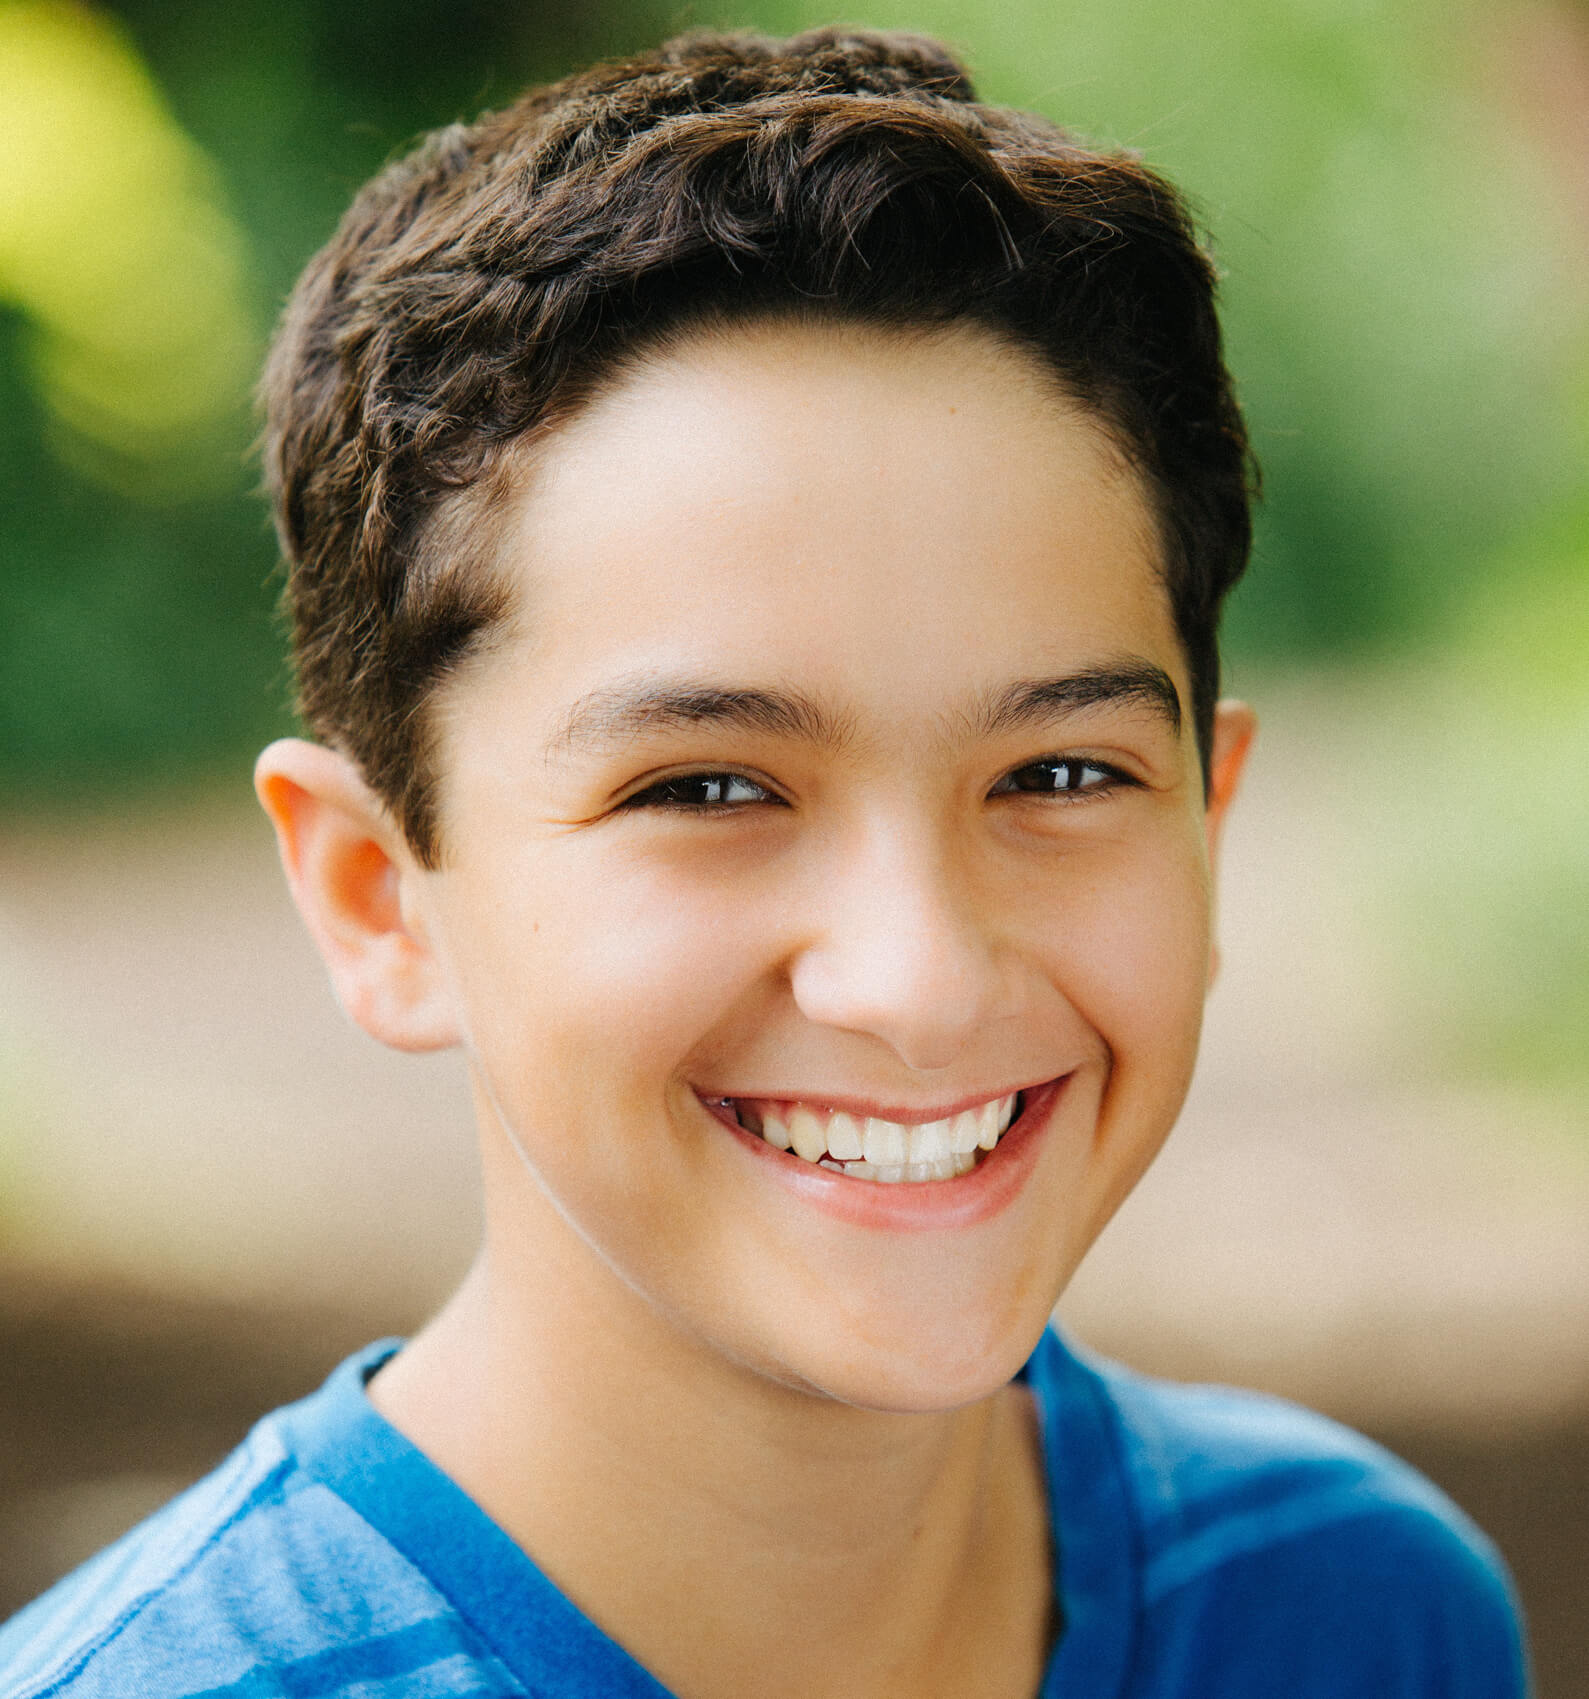 14 year-old Royce Mann on White Boy Privilege and Unschooling